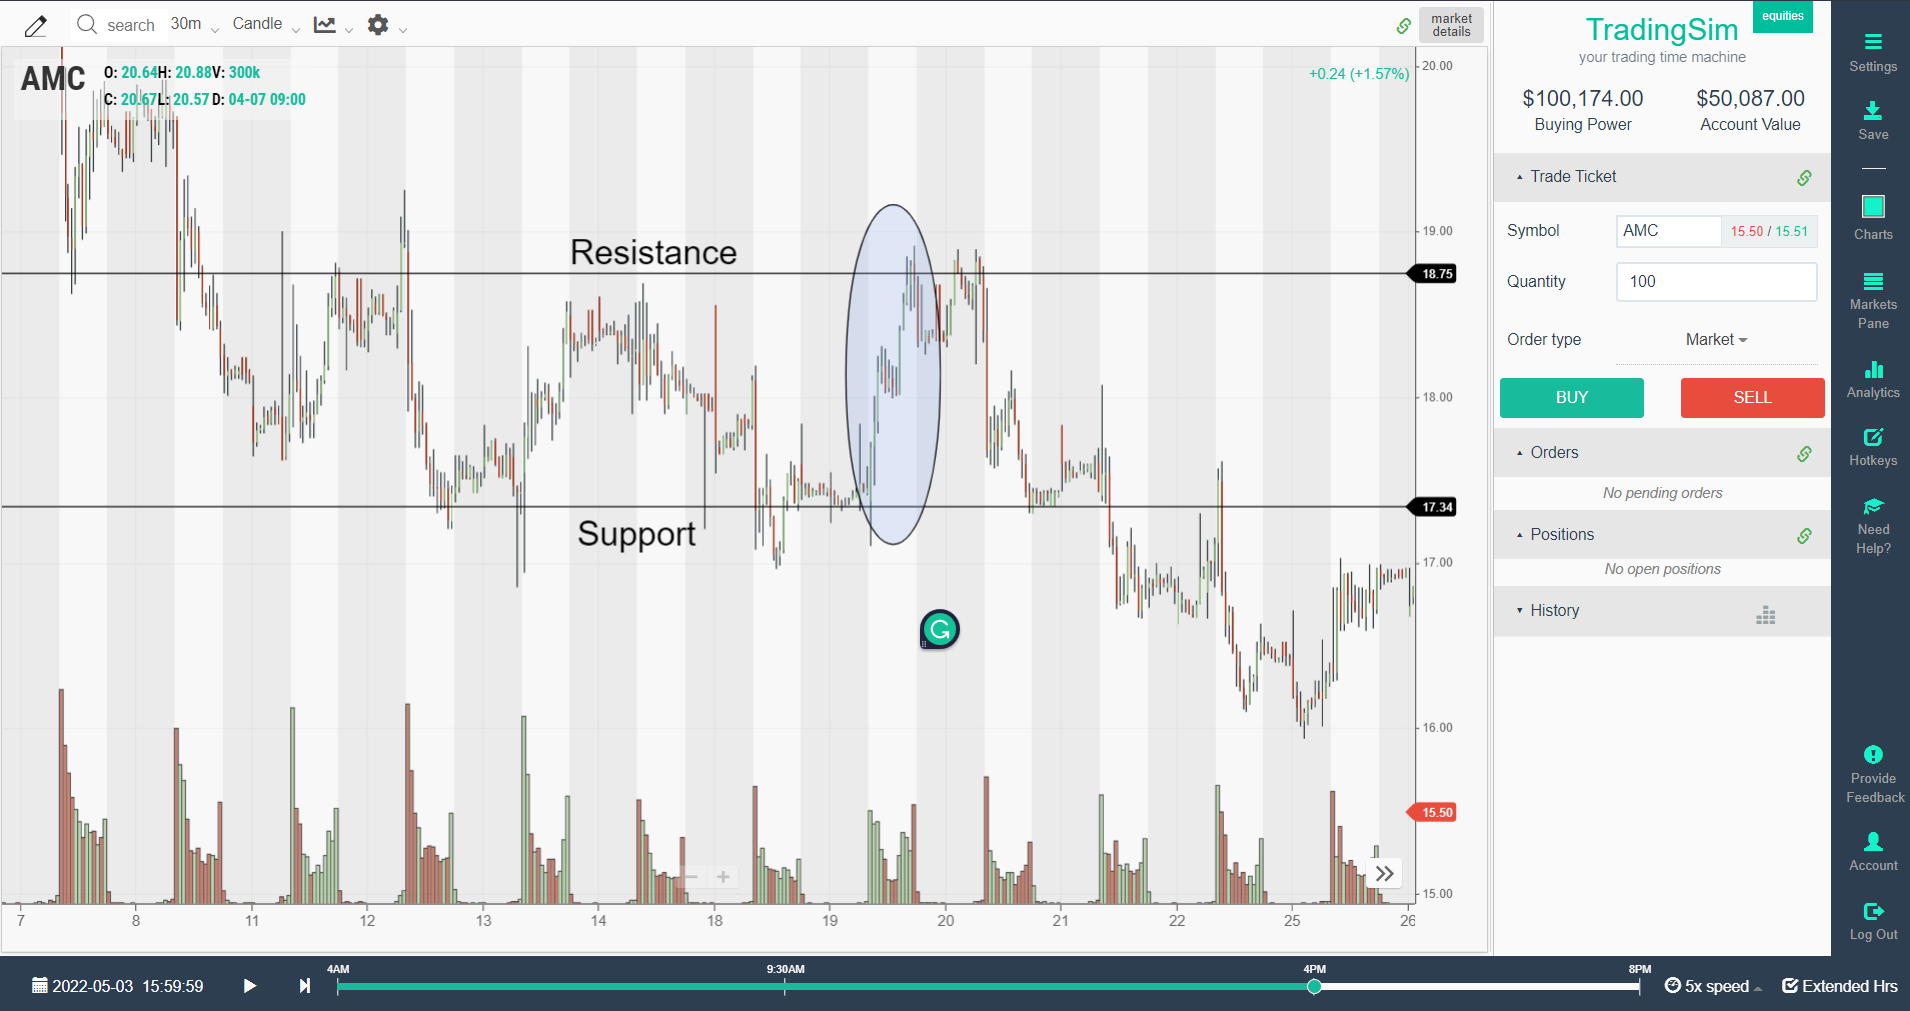 AMC support and resistance lines